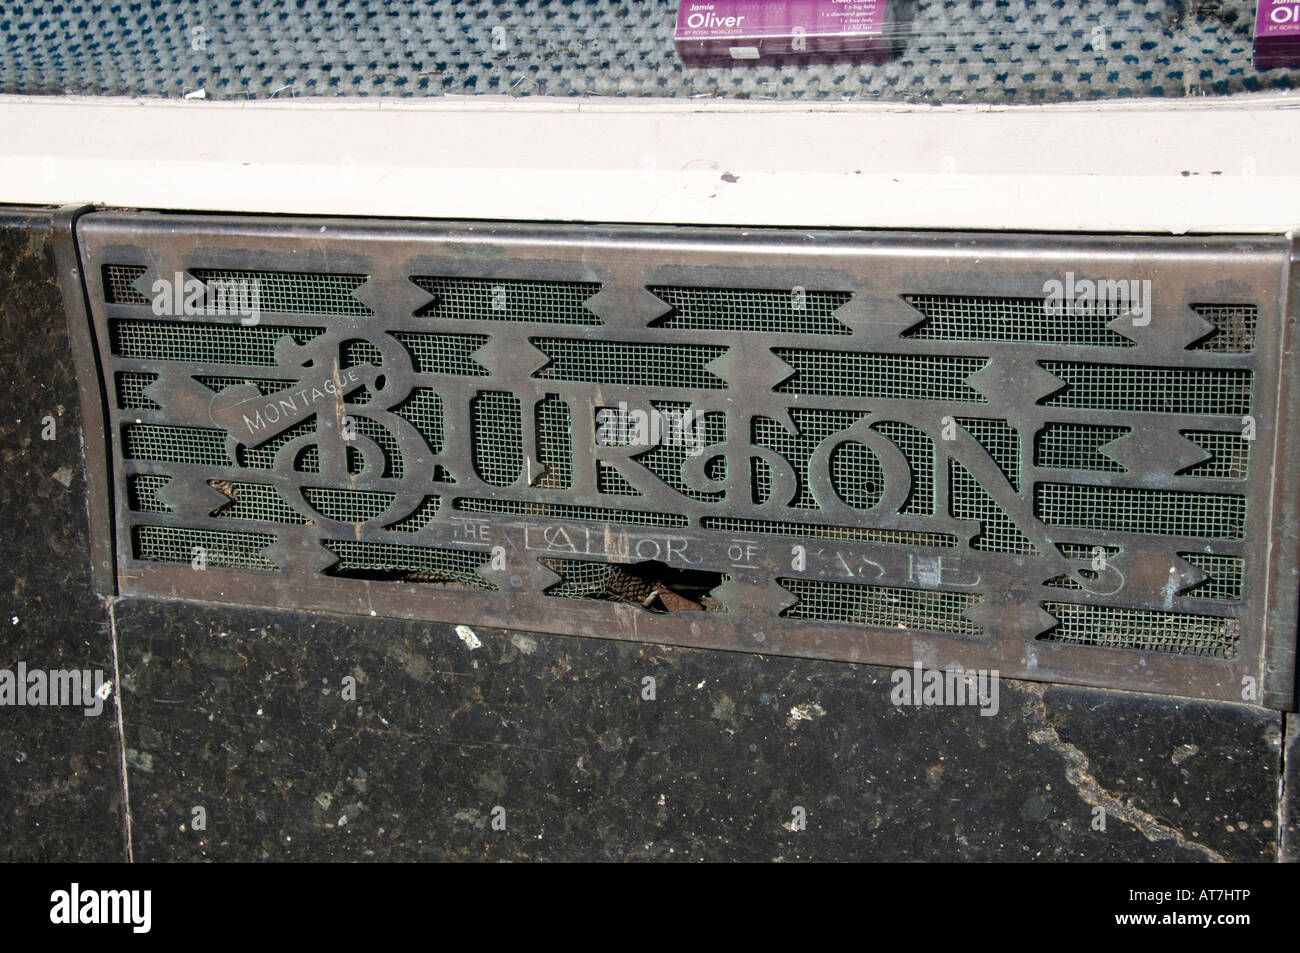 Brass air vent cover grille plate Montague Burton the Tailor of Taste on former clothes store Aberystwyth Wales UK Stock Photo